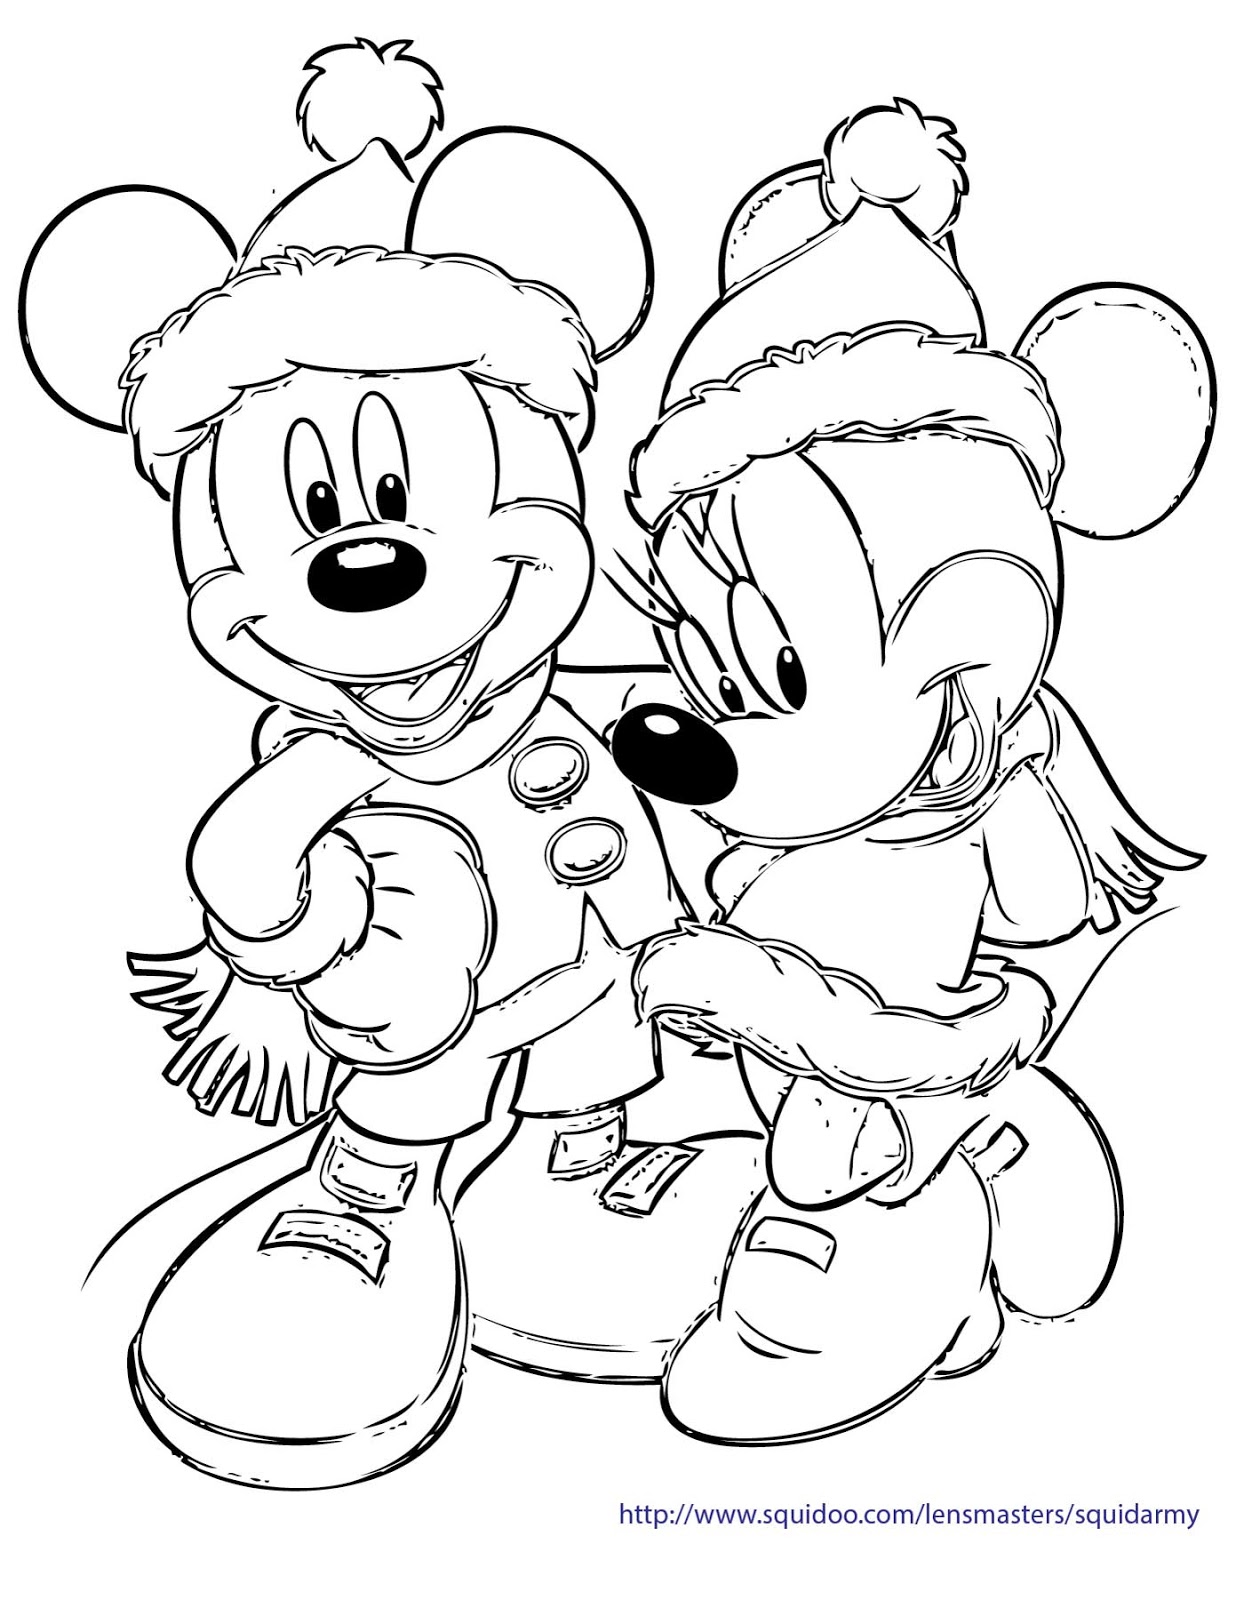 Minnie Mouse Christmas Coloring Pages at GetDrawings | Free download